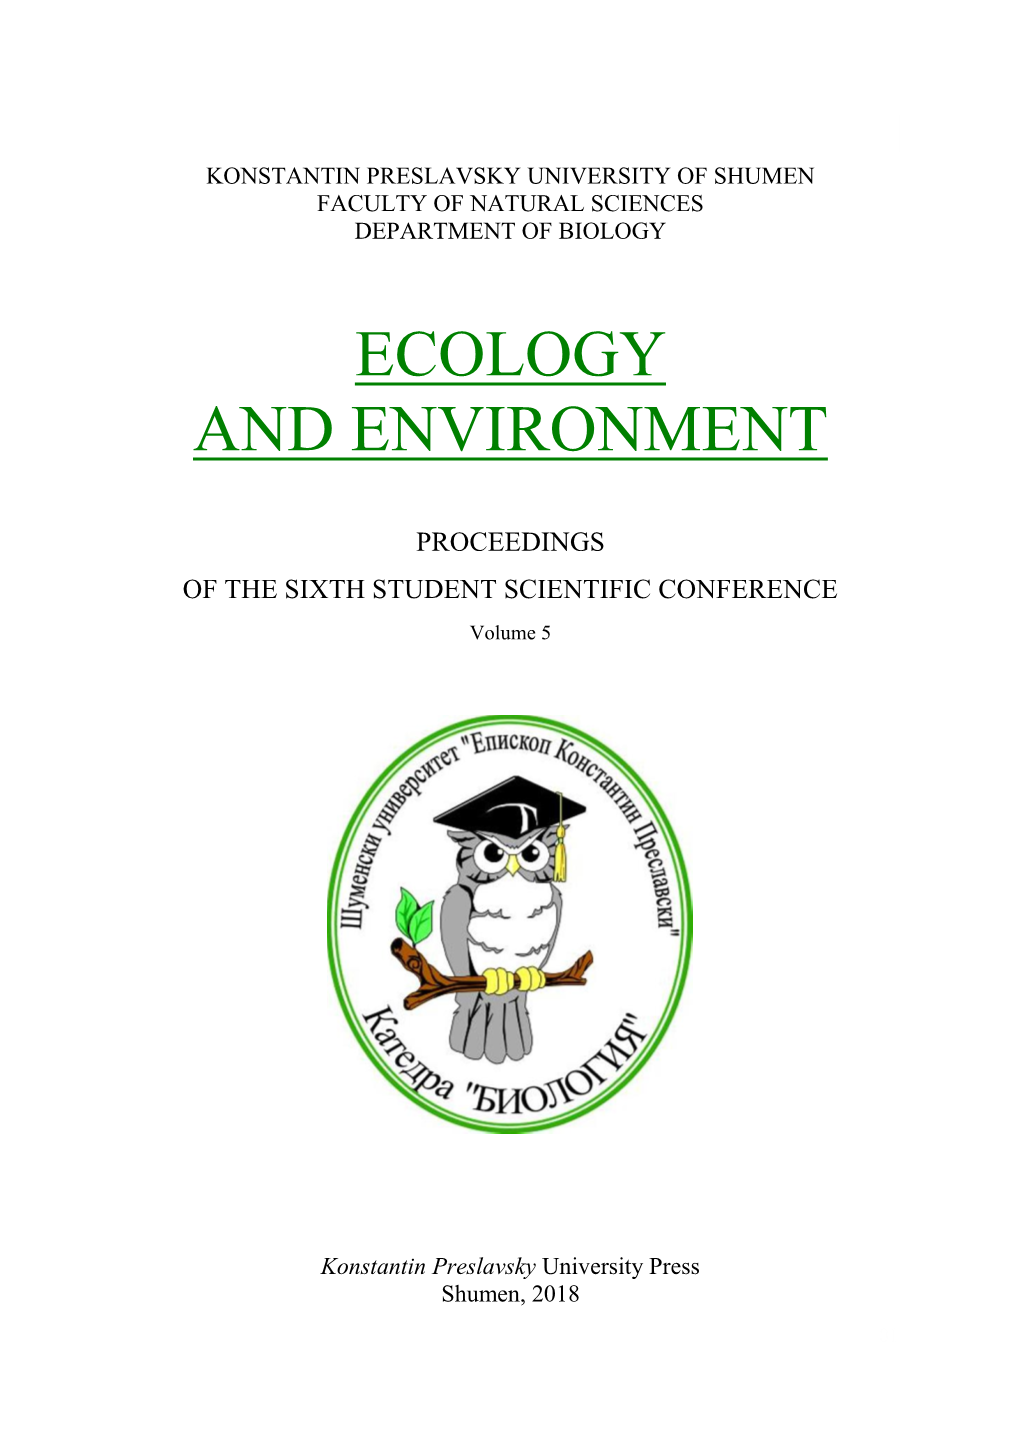 Sixth Student Scientific Conference “Ecology and Environment” Held in April 20-21, 2018 at Konstantin Preslavsky University of Shumen